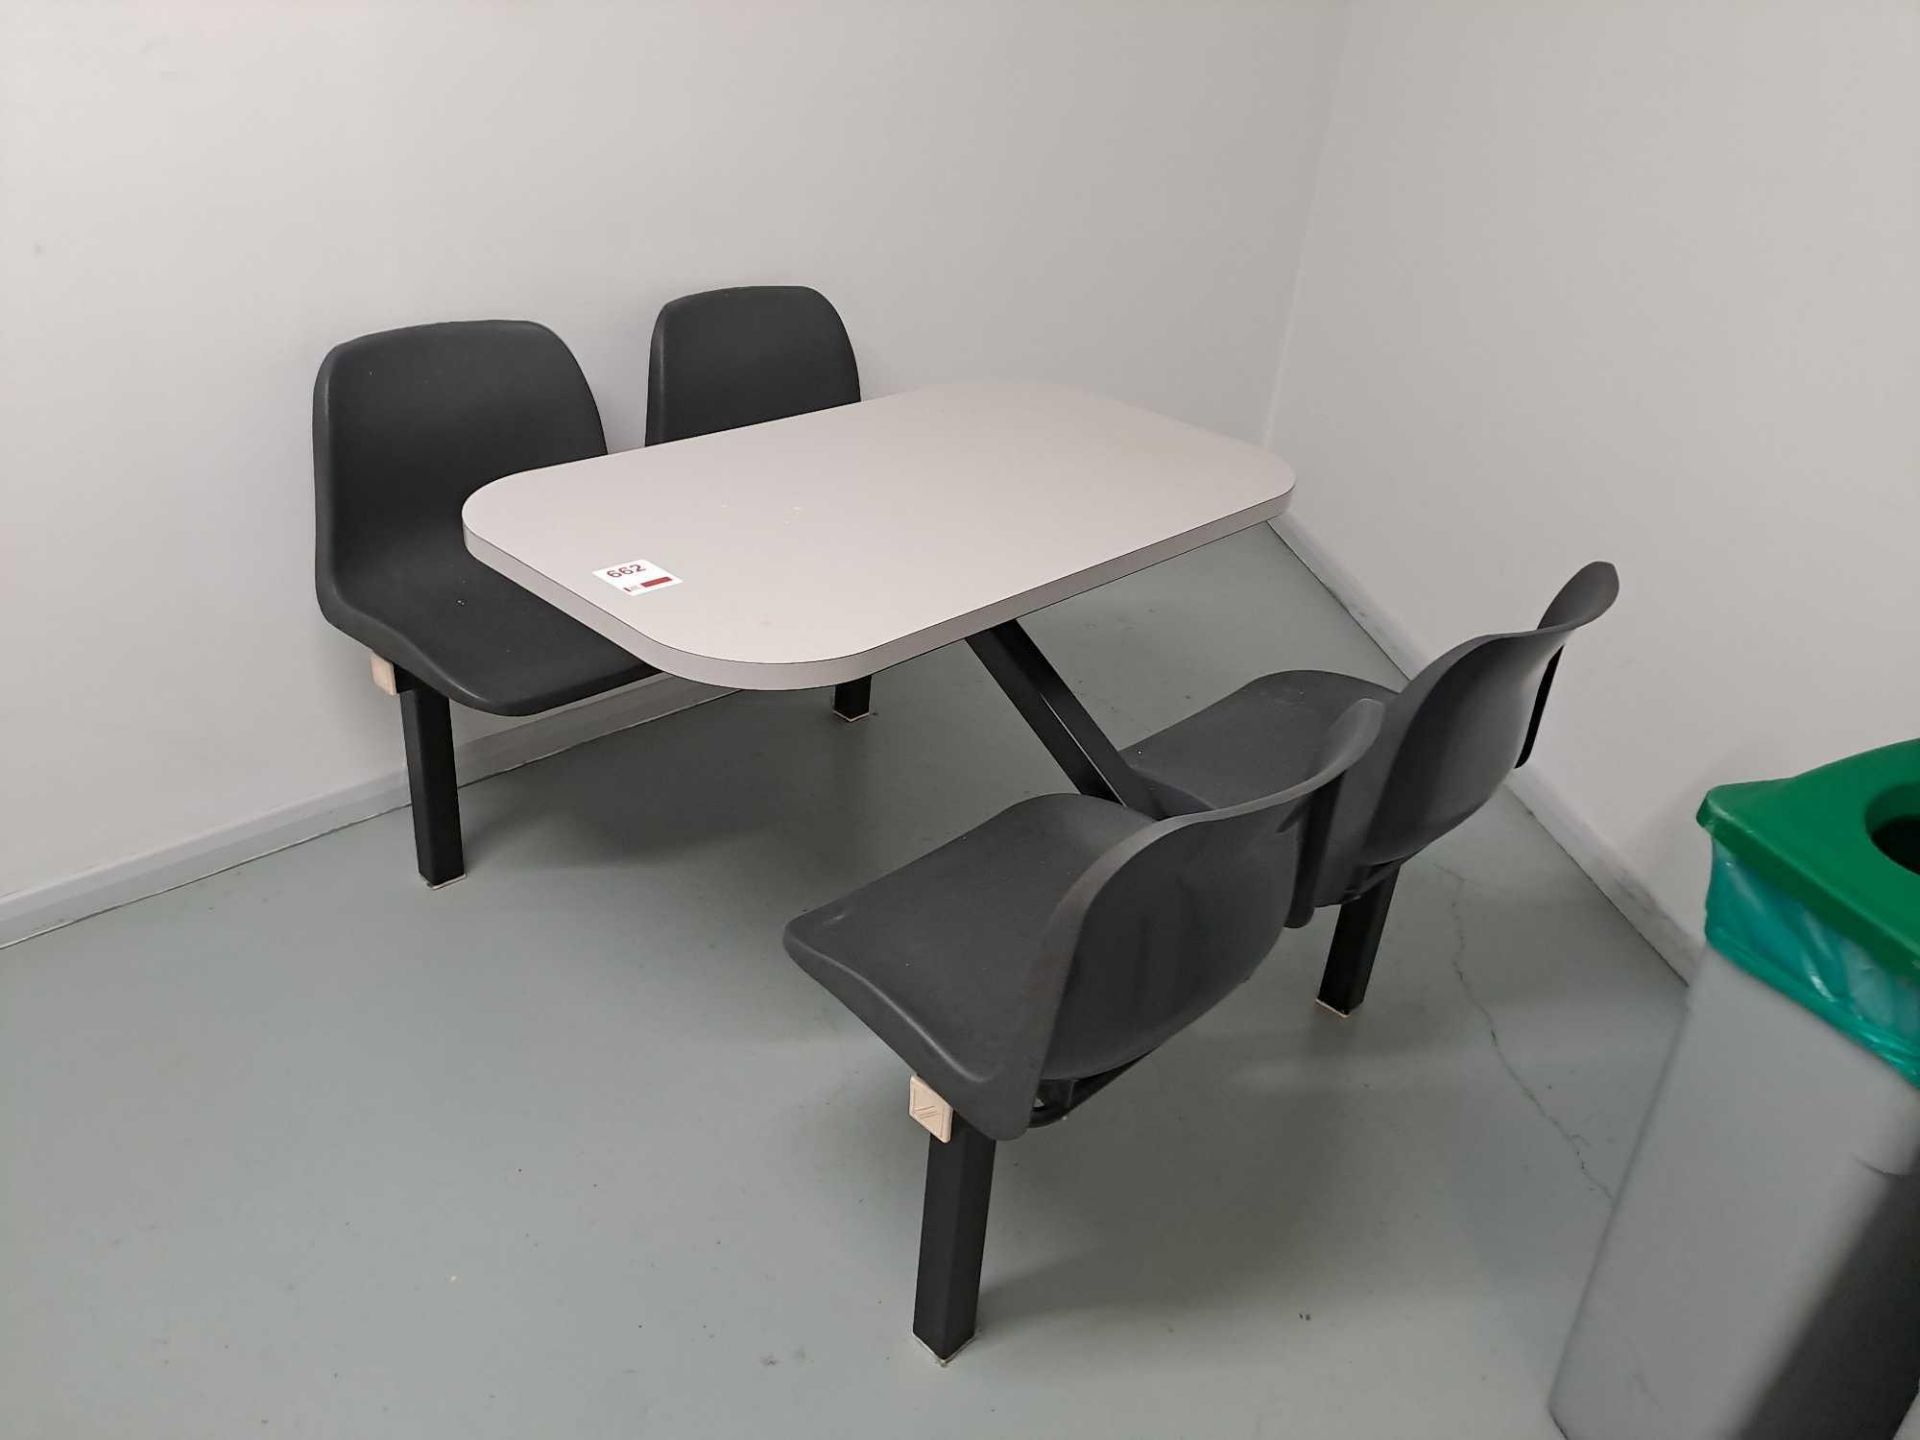 Two 4-seat canteen benchtop tables